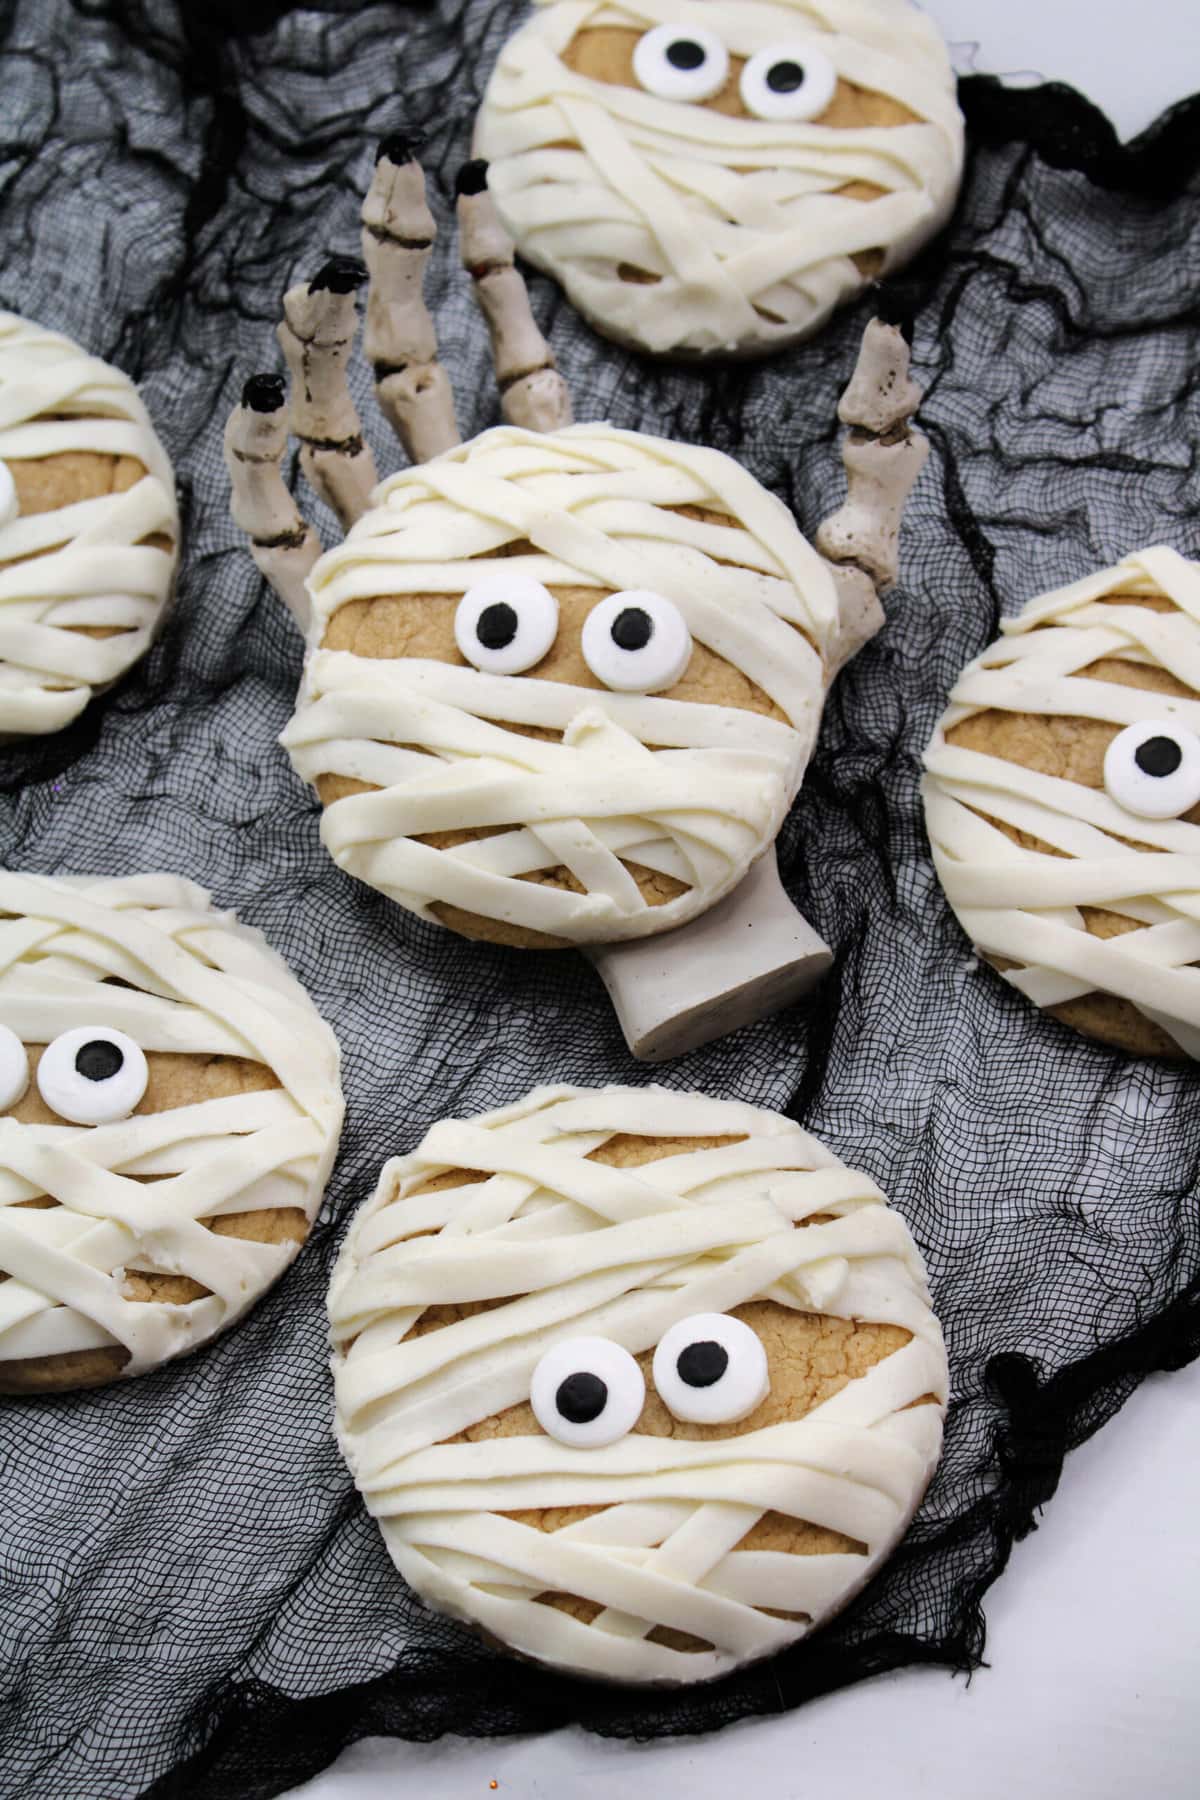 Mummy Cookies on a cloth.